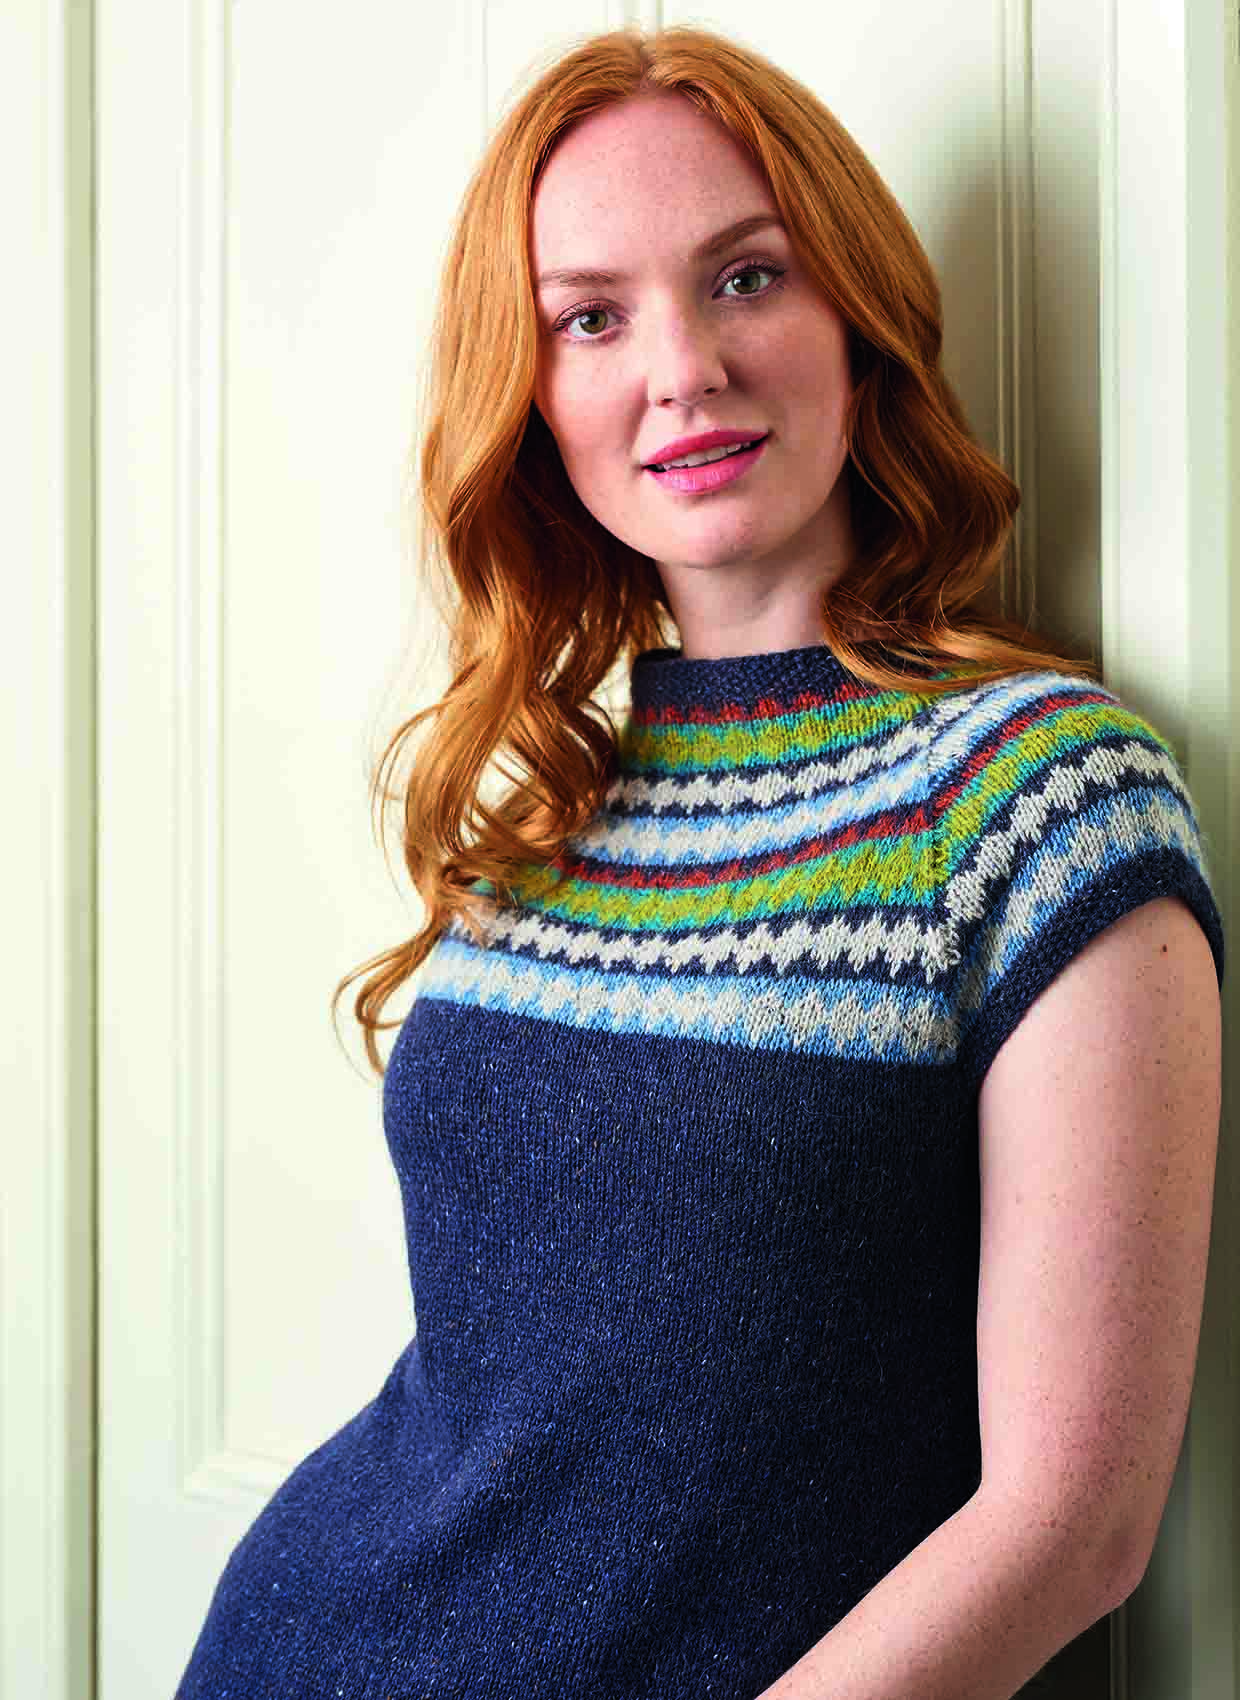 Redhaired model whose name is sylvia looks seriously into he camera, you can see the detail of the colour work yoke on the knitted dress pattern she is modelling